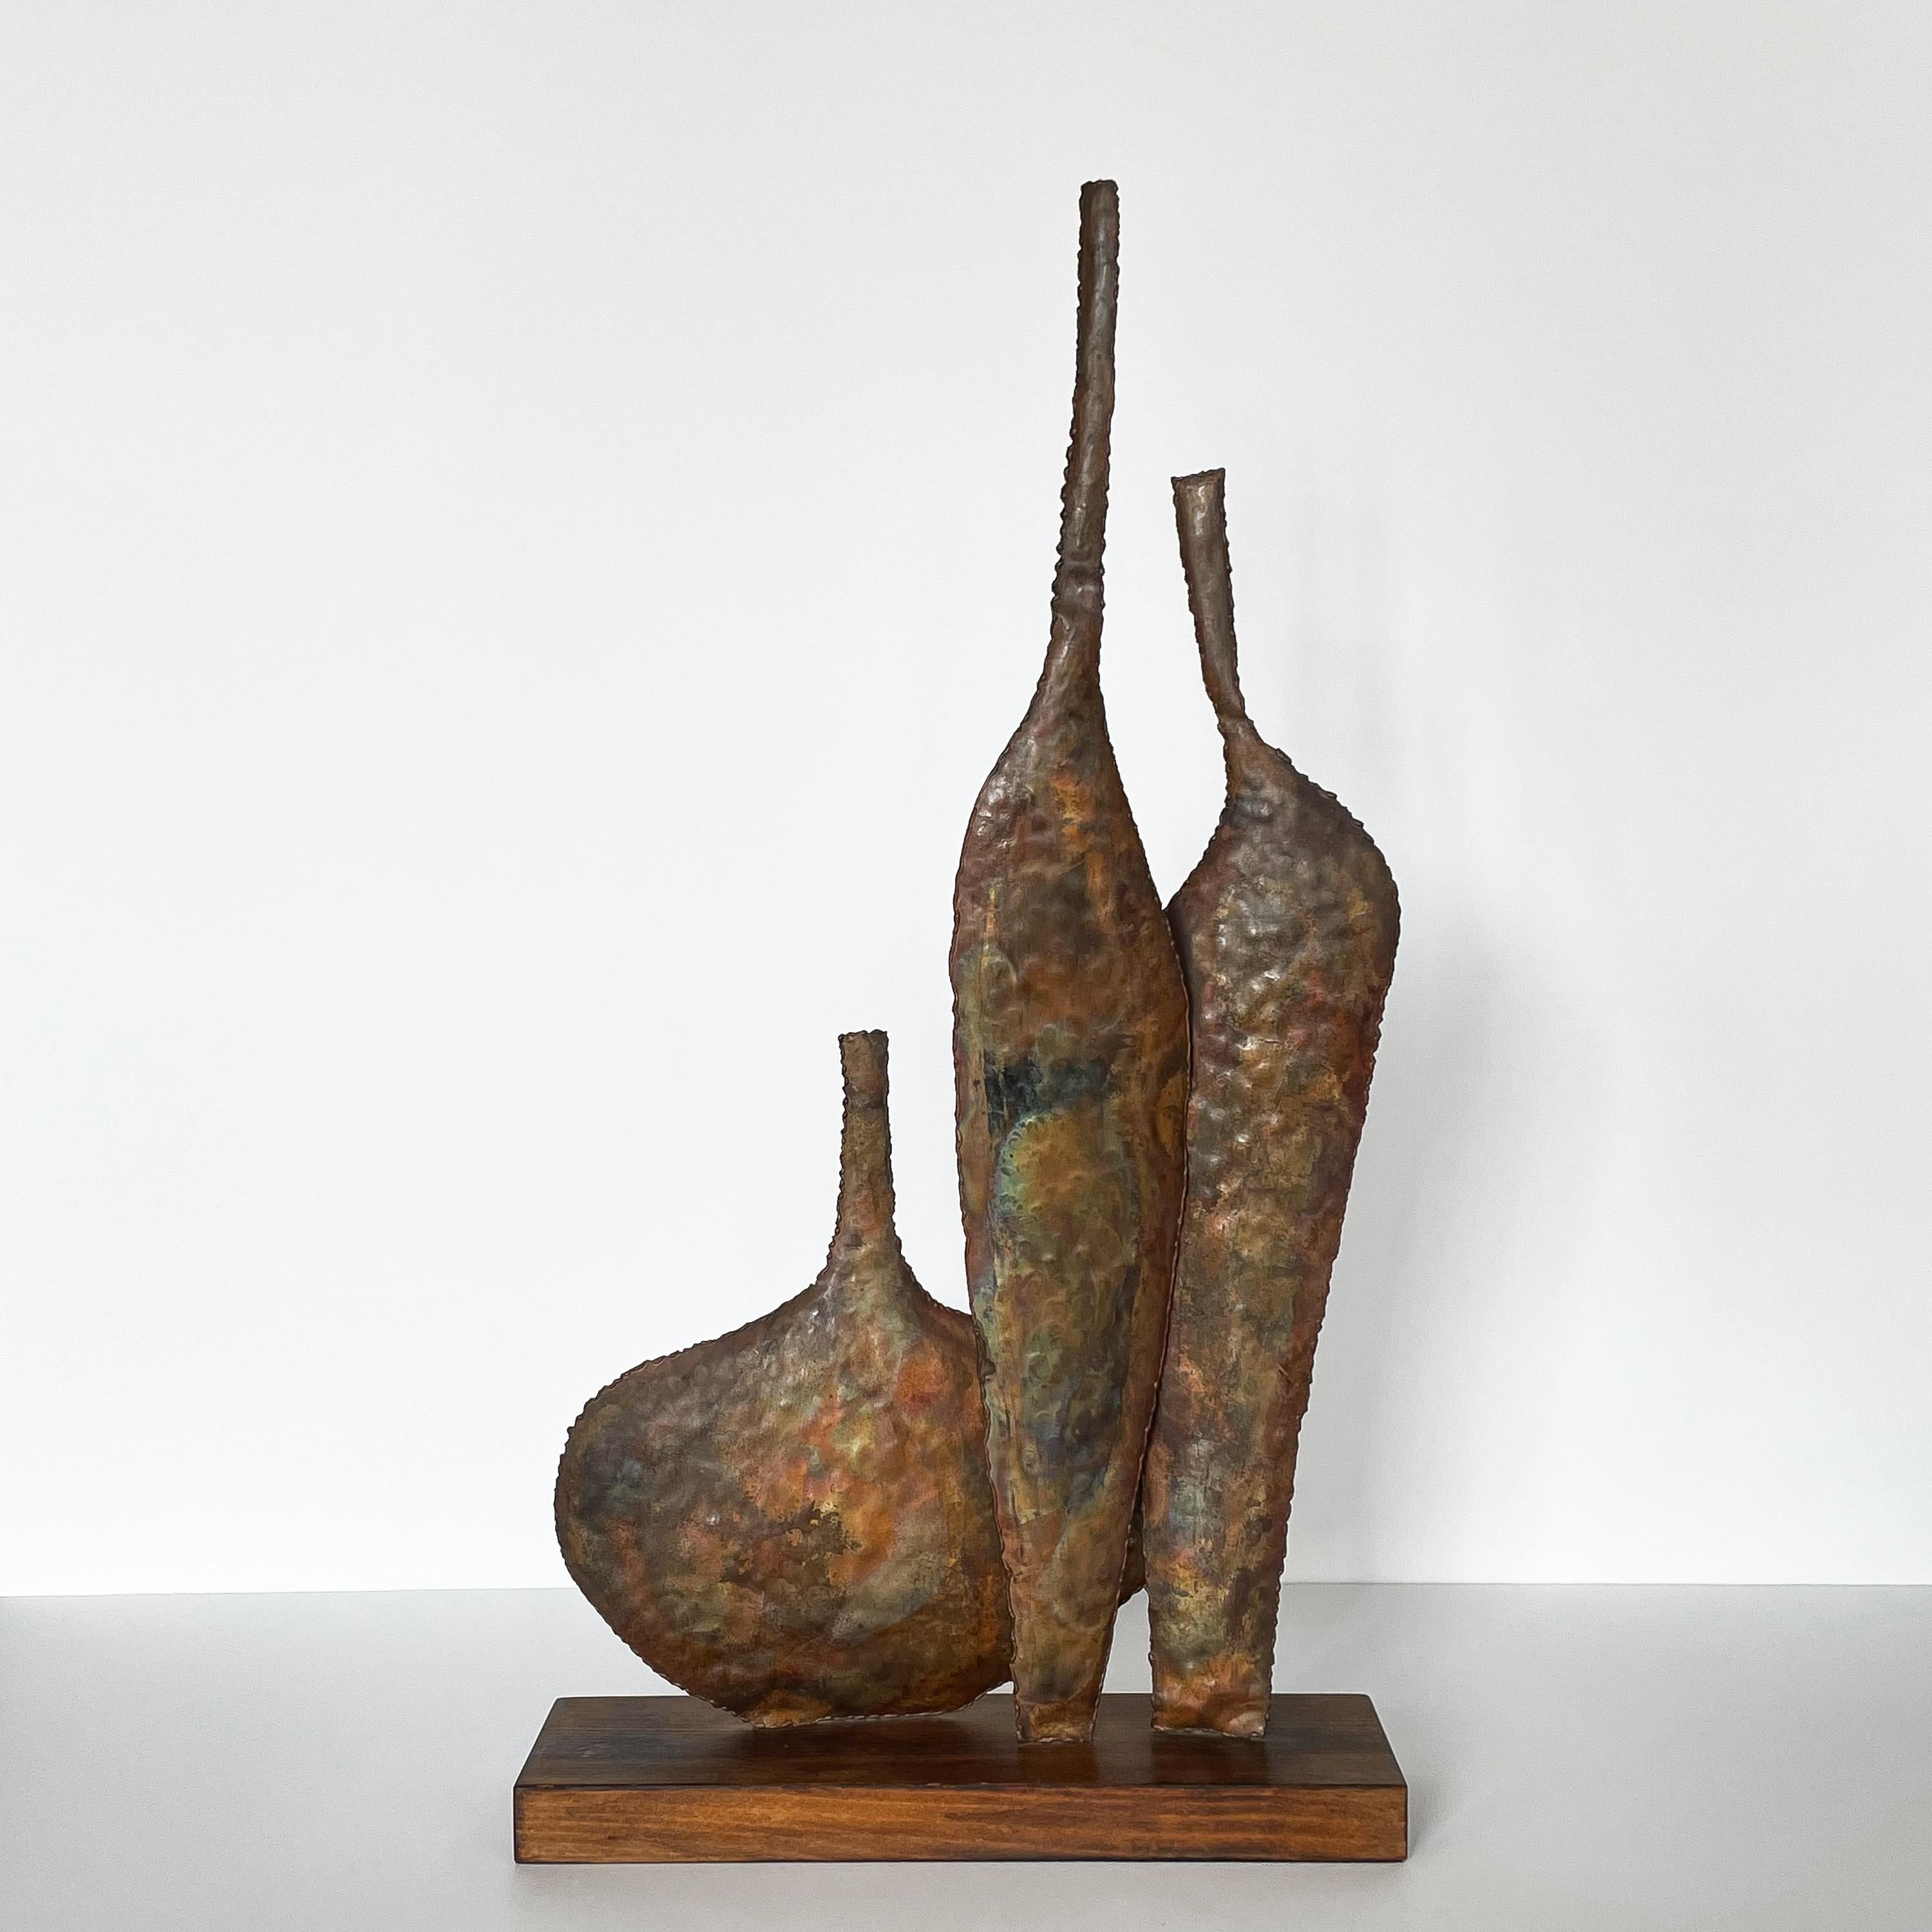 Mid century Brutalist copper bottle sculpture by Marcello Fantoni for Raymor, circa 1950s. Hand-wrought copper sculpture by Marcello Fantoni. Three varying sized abstract bottles on a wooden stand. Marked on wooden base 